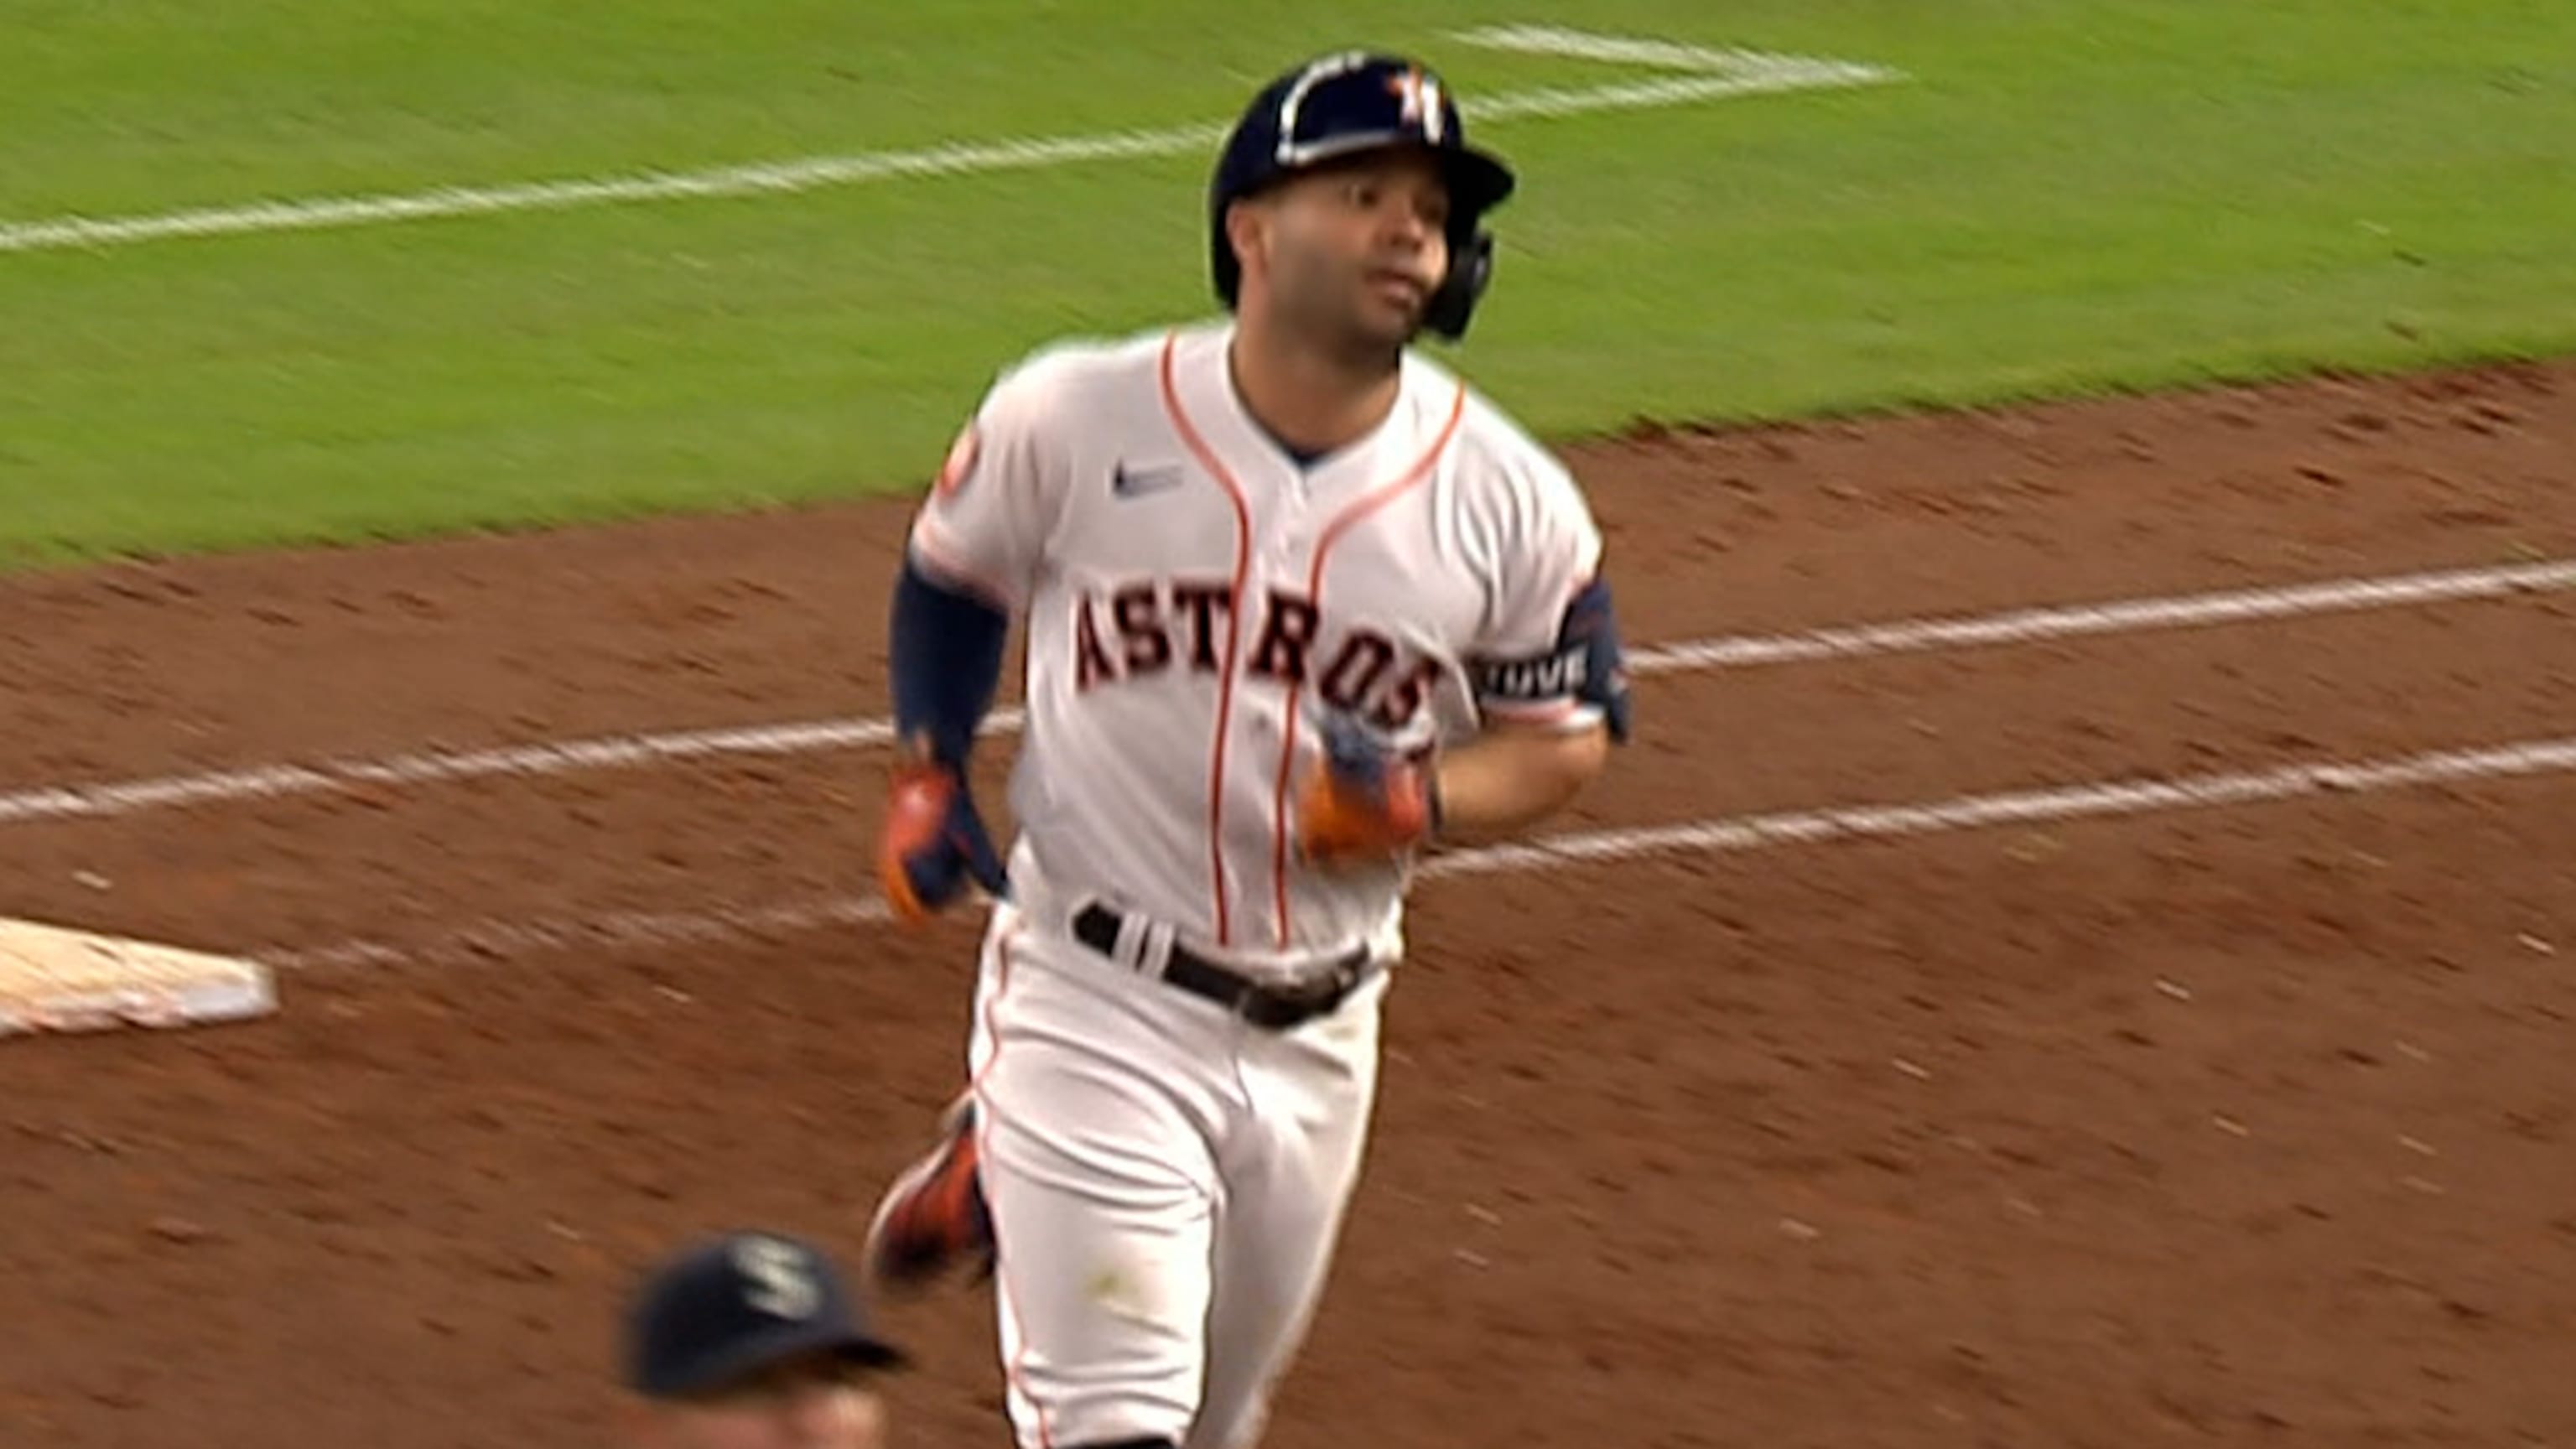 Sportsnet Stats on X: As seen on @timandsid, Jose Altuve's home